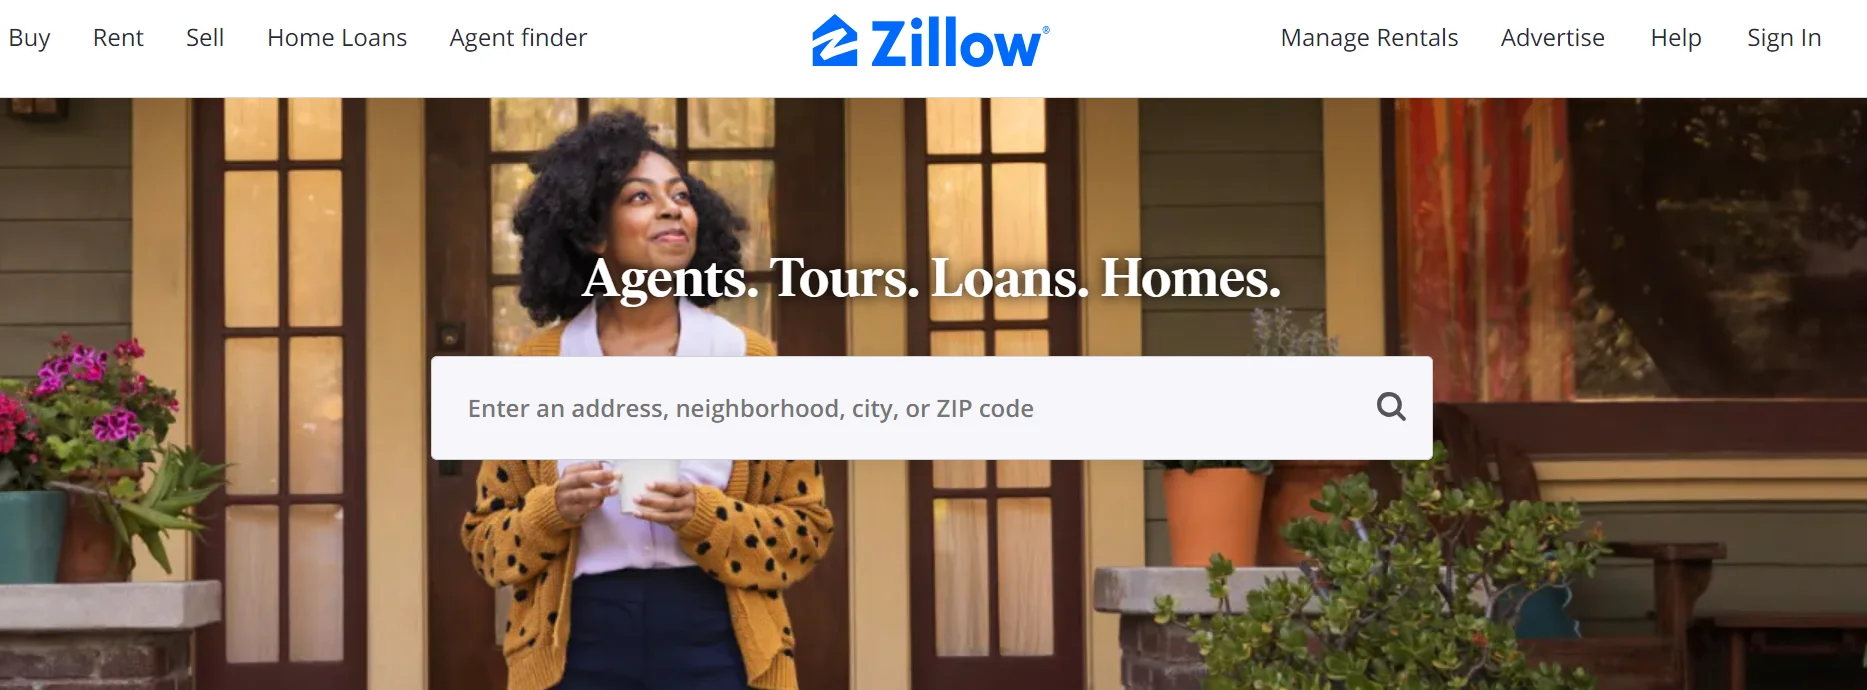 Home page of zillow